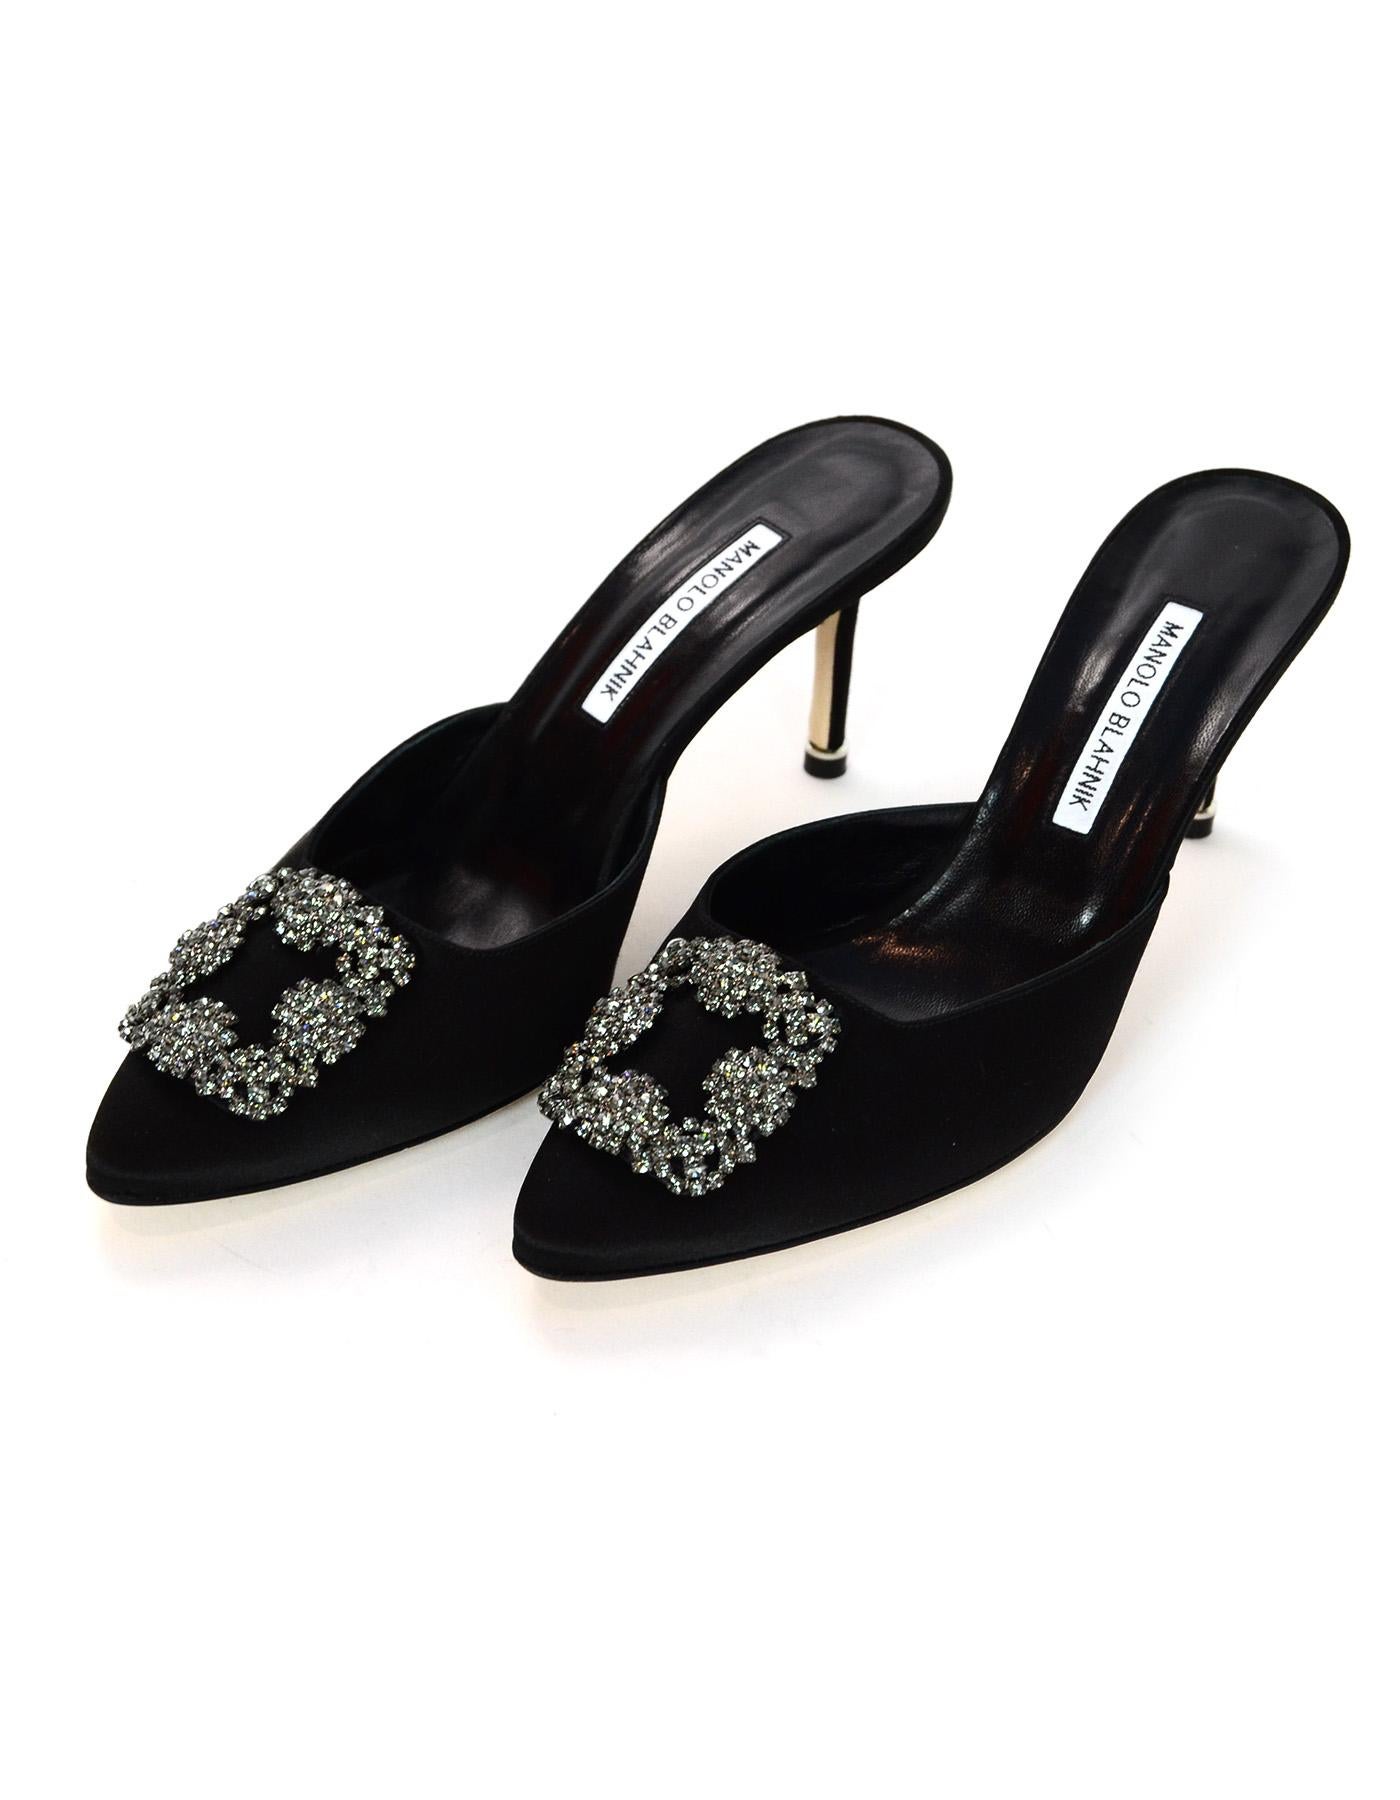 Manolo Blahnik Black Satin / Crystal Hangisi 70 Mules, 2018 In Excellent Condition In New York, NY